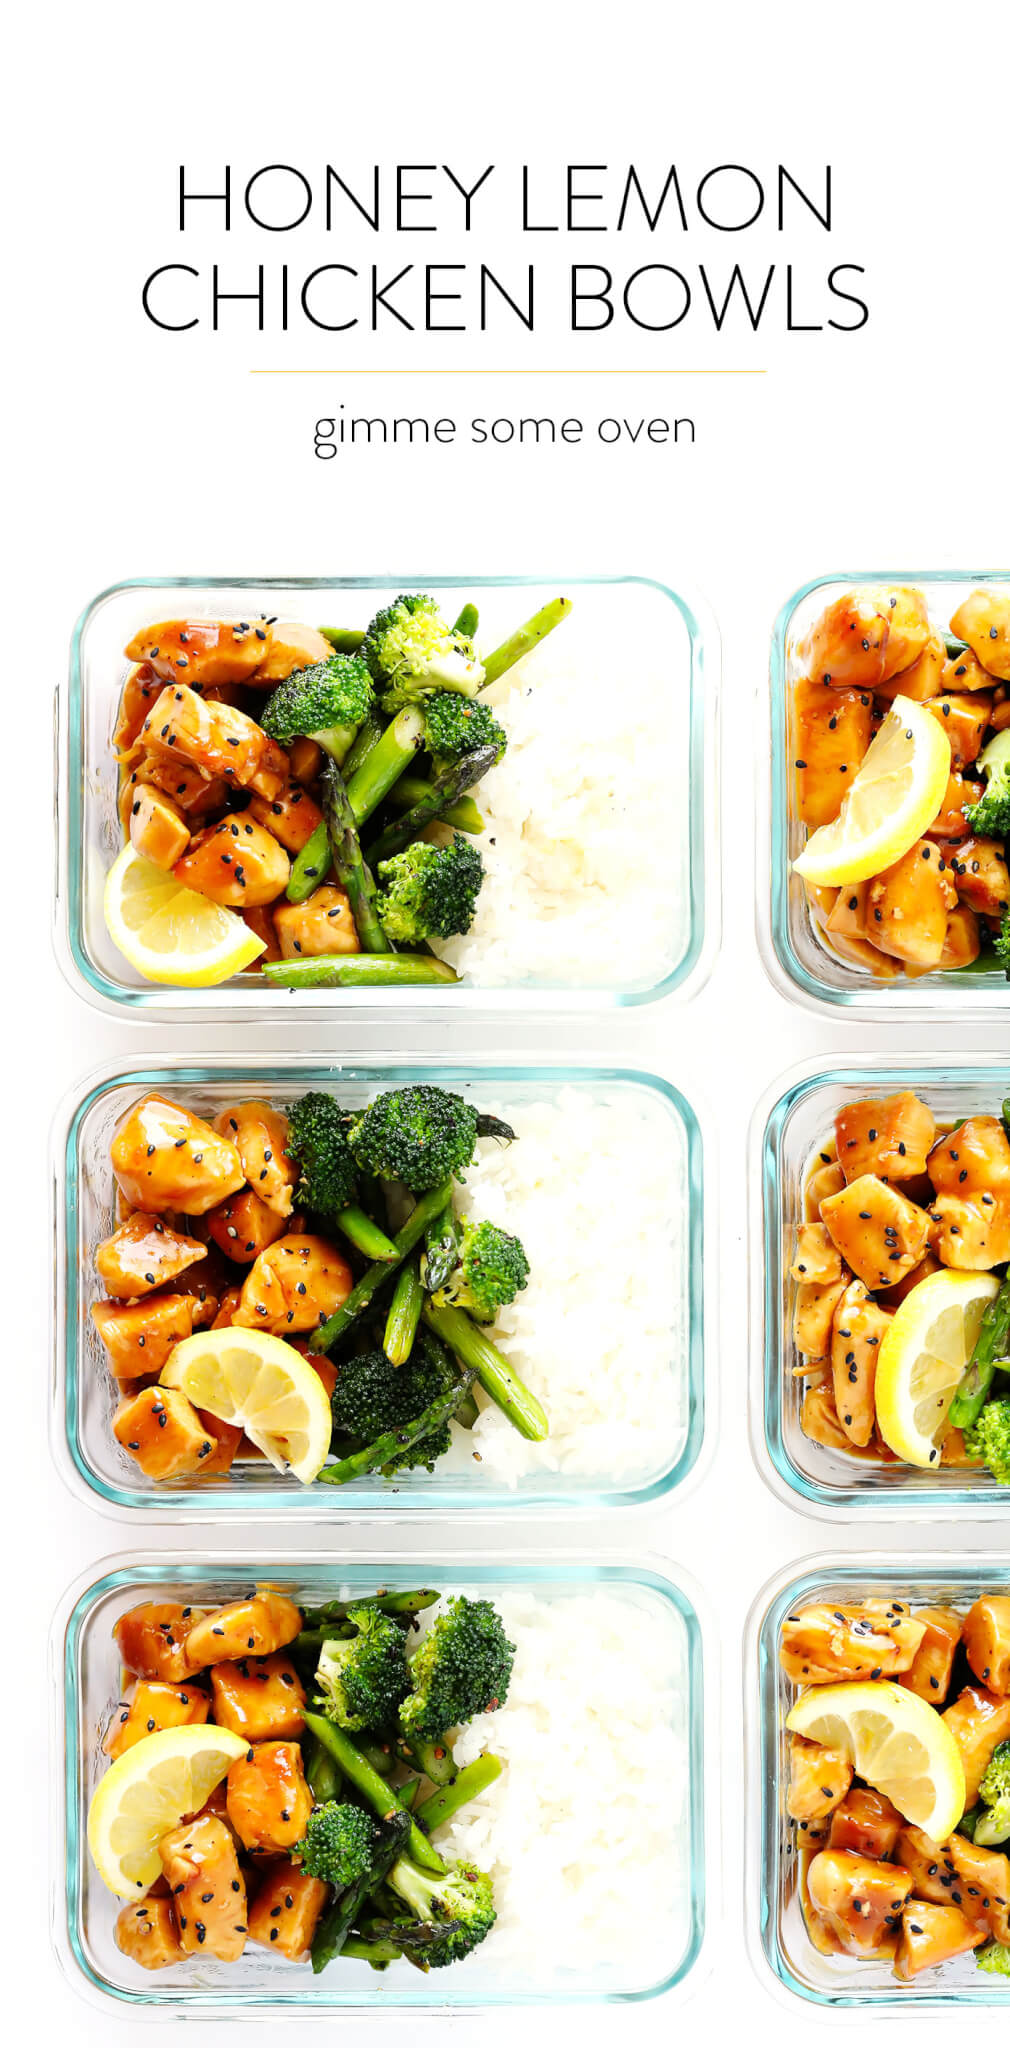 These Honey Lemon Chicken Bowls are one of my favorite healthy lunch or dinner meal prep ideas. They're quick and easy to prepare, made with an Asian honey lemon garlic sesame sauce, fresh asparagus and broccoli (or any vegetables), rice or quinoa. And they are delicious and naturally gluten-free! | gimmesomeoven.com